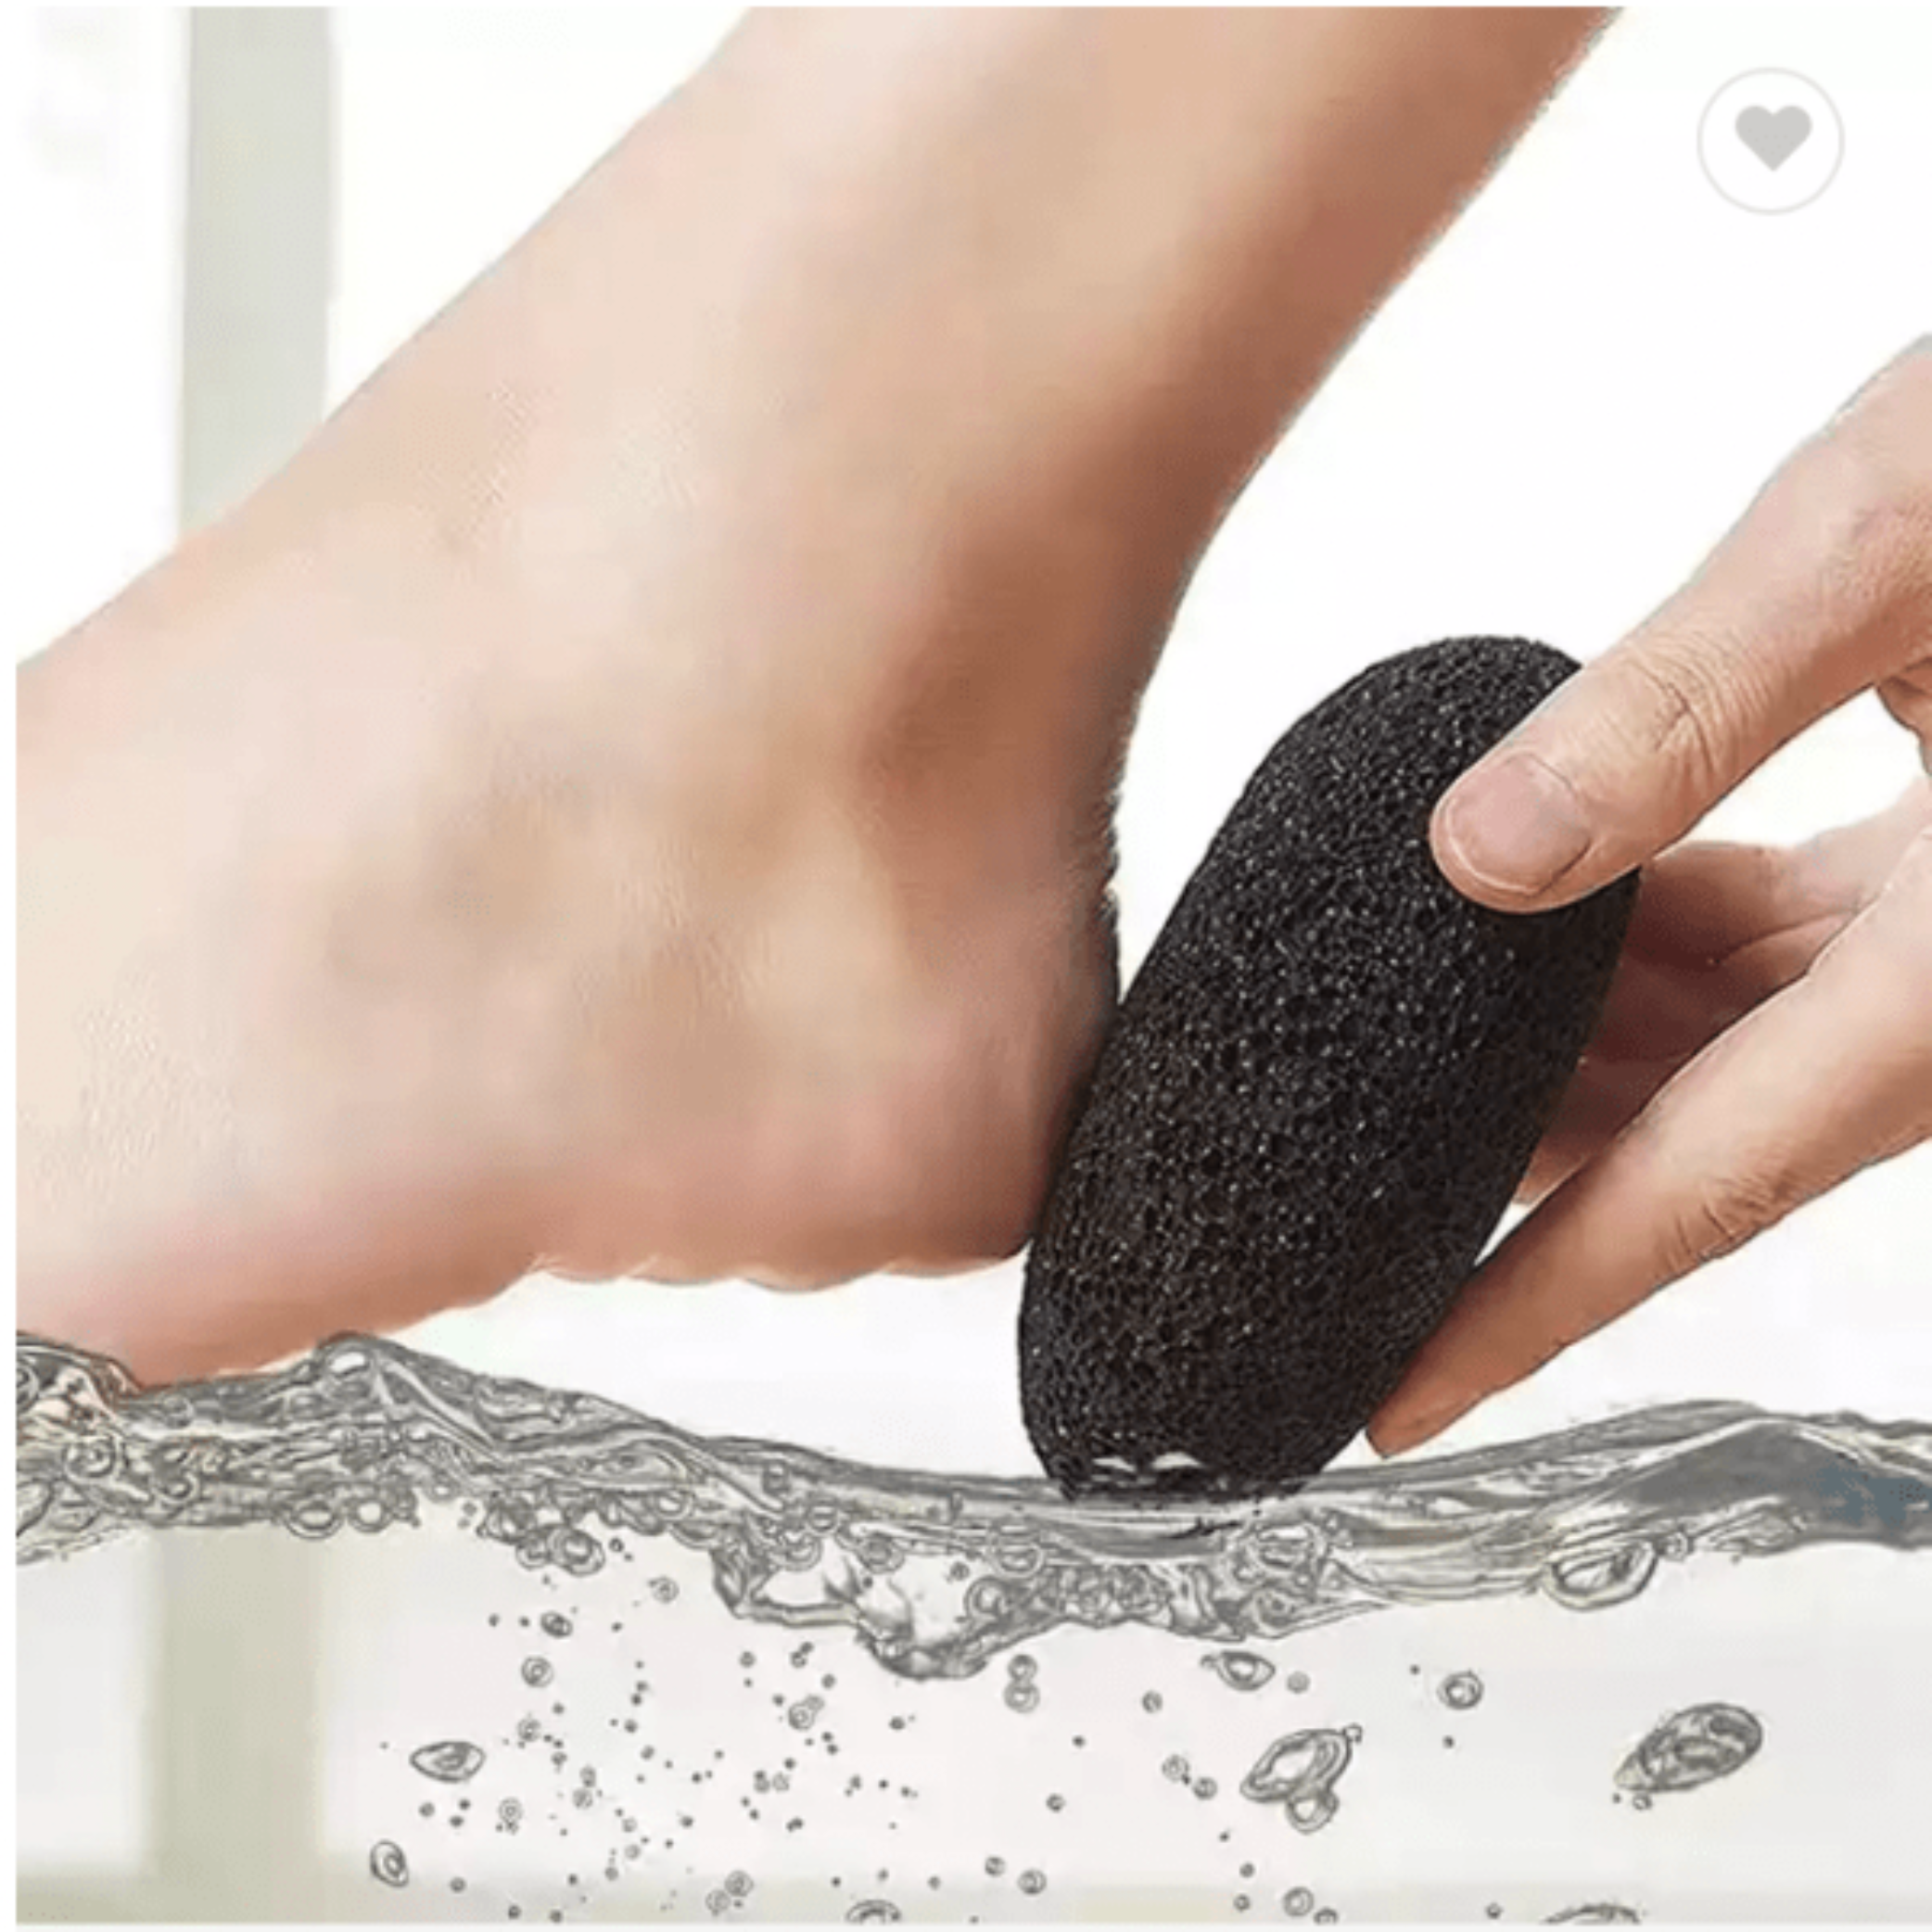 Pumice Stone being applied to heels